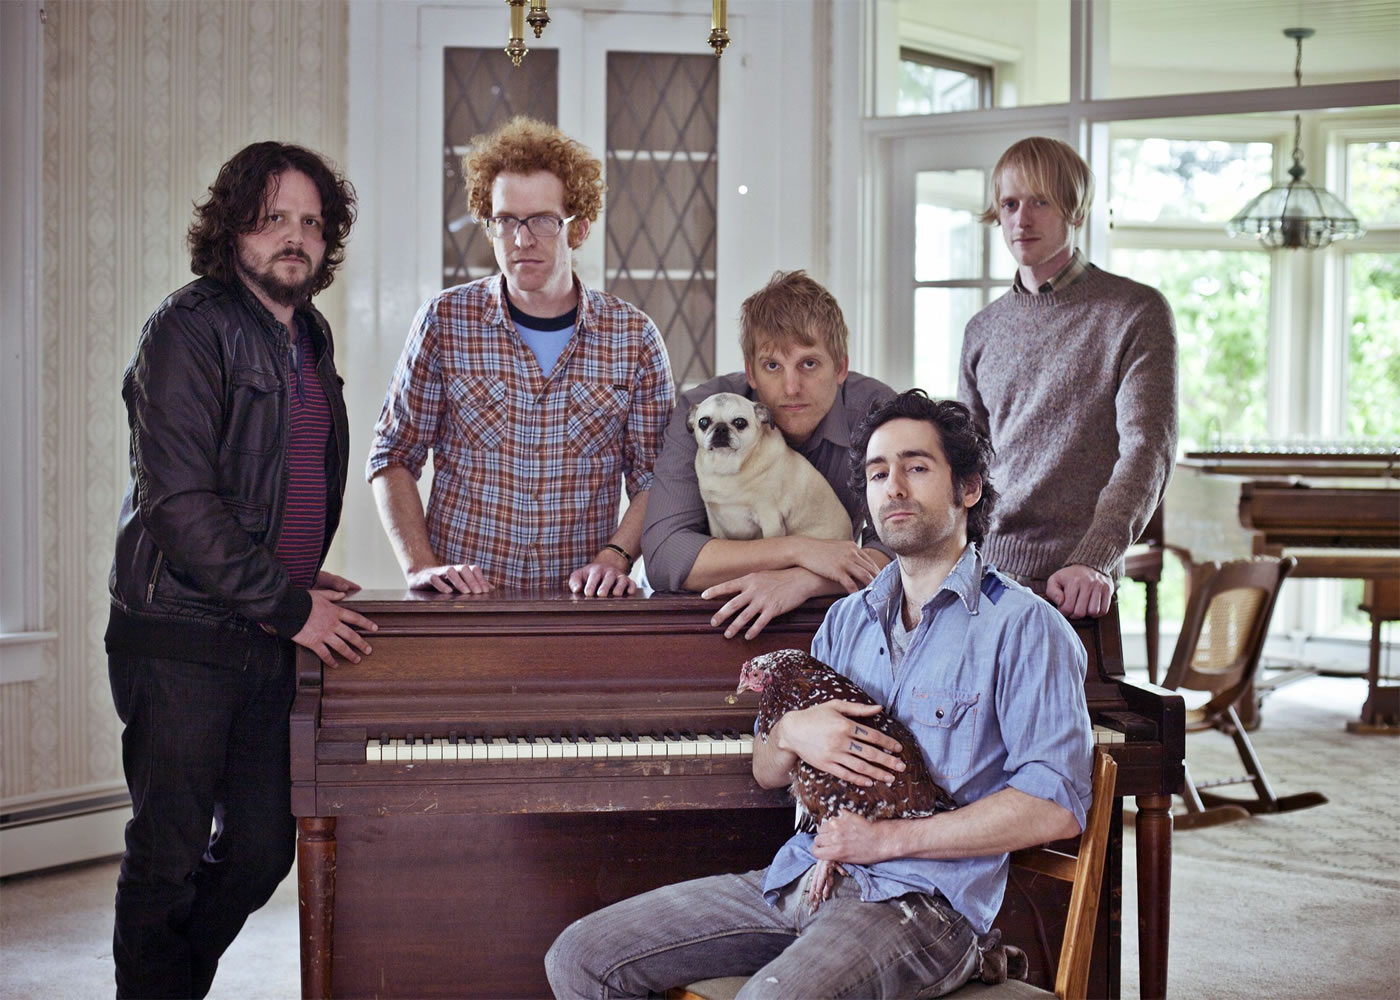 Experimental folk-country band Blitzen Trapper will perform on Tuesday at the Doug Fir Lounge in Portland.